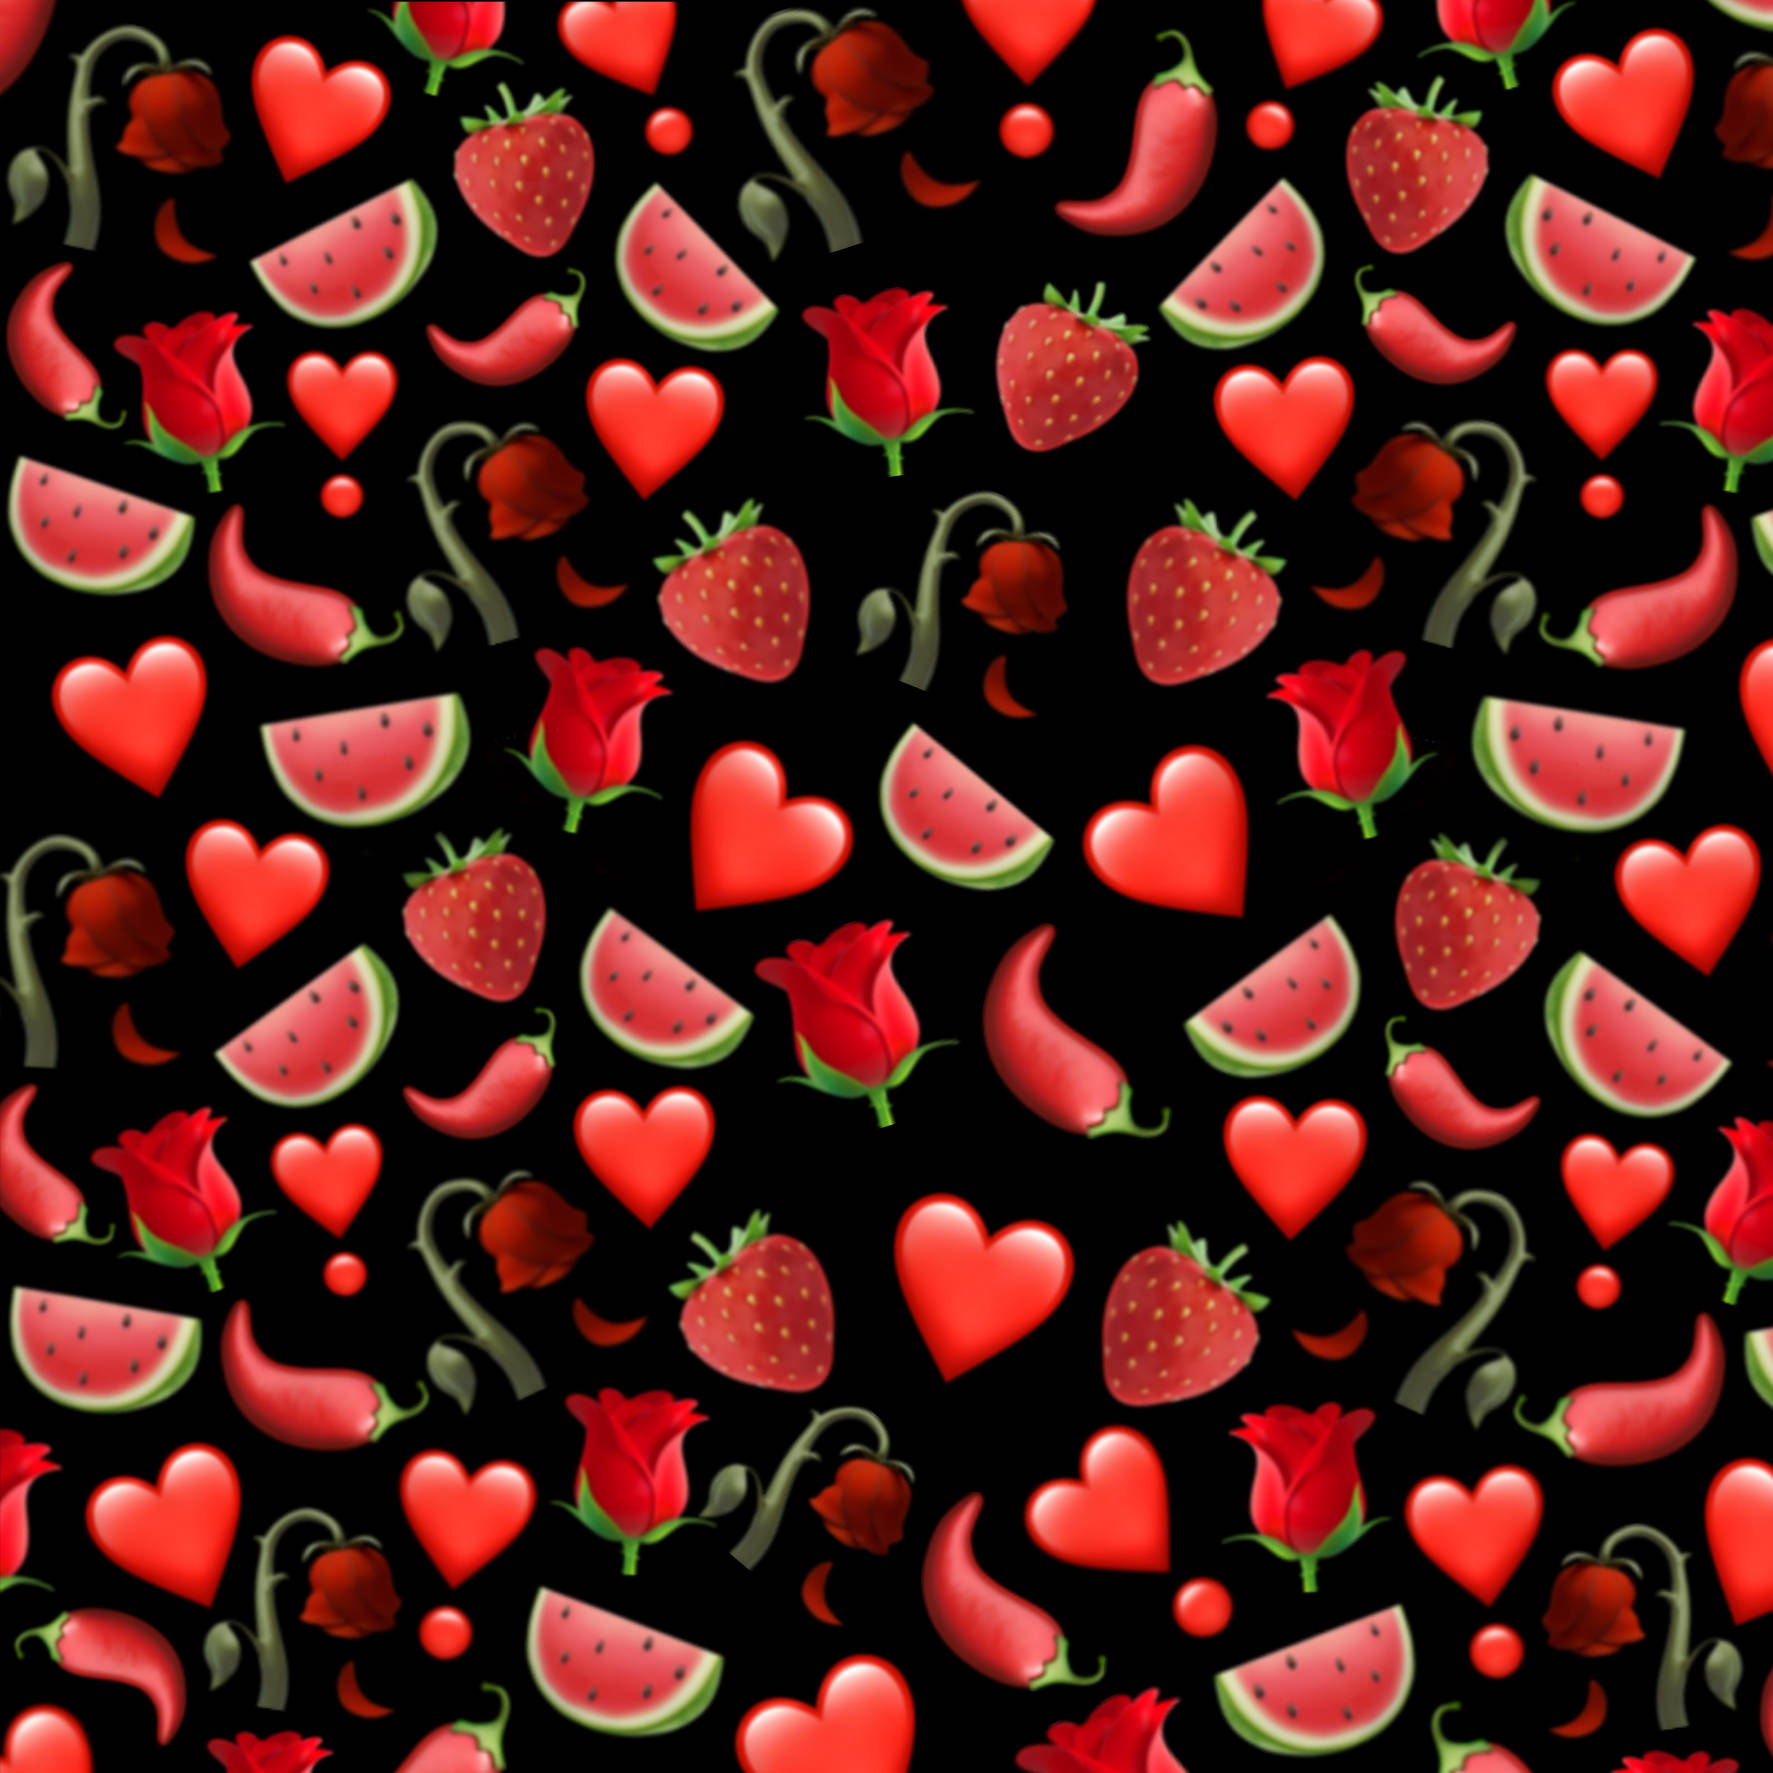 Luscious strawberry full of vibrant colors and sweet tastes Wallpaper